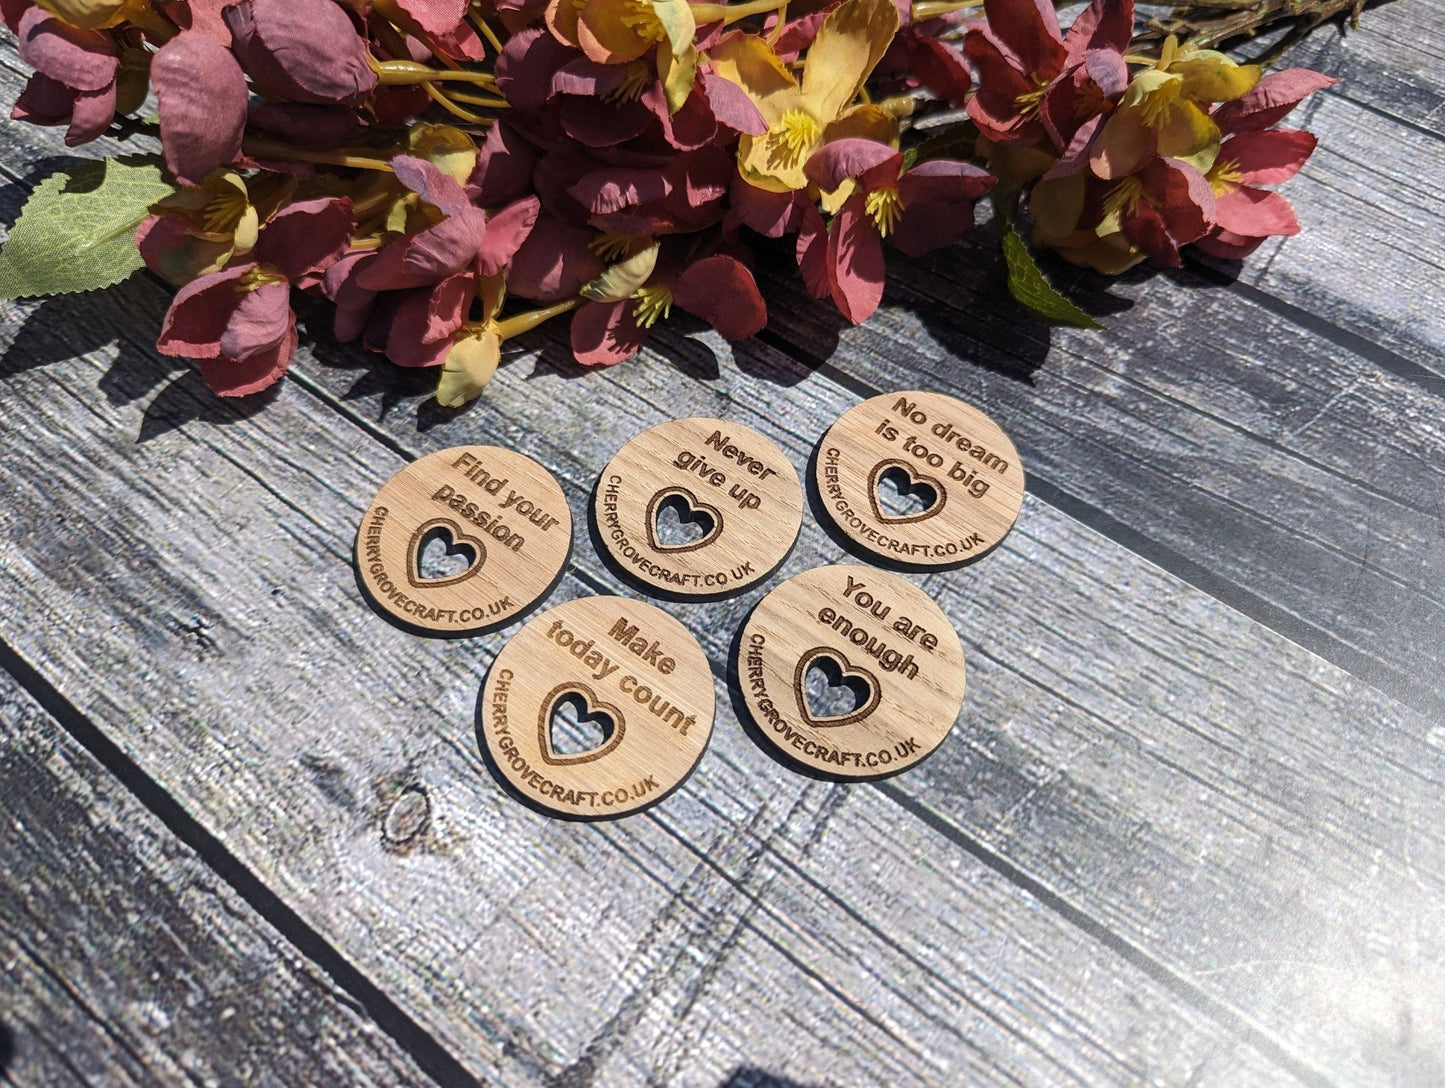 Branded Promotional Coins | Custom Wooden Promotional Discs | Personalised Eco-Friendly Giveaways | Hug Token Giveaway | Free Design Service - CherryGroveCraft